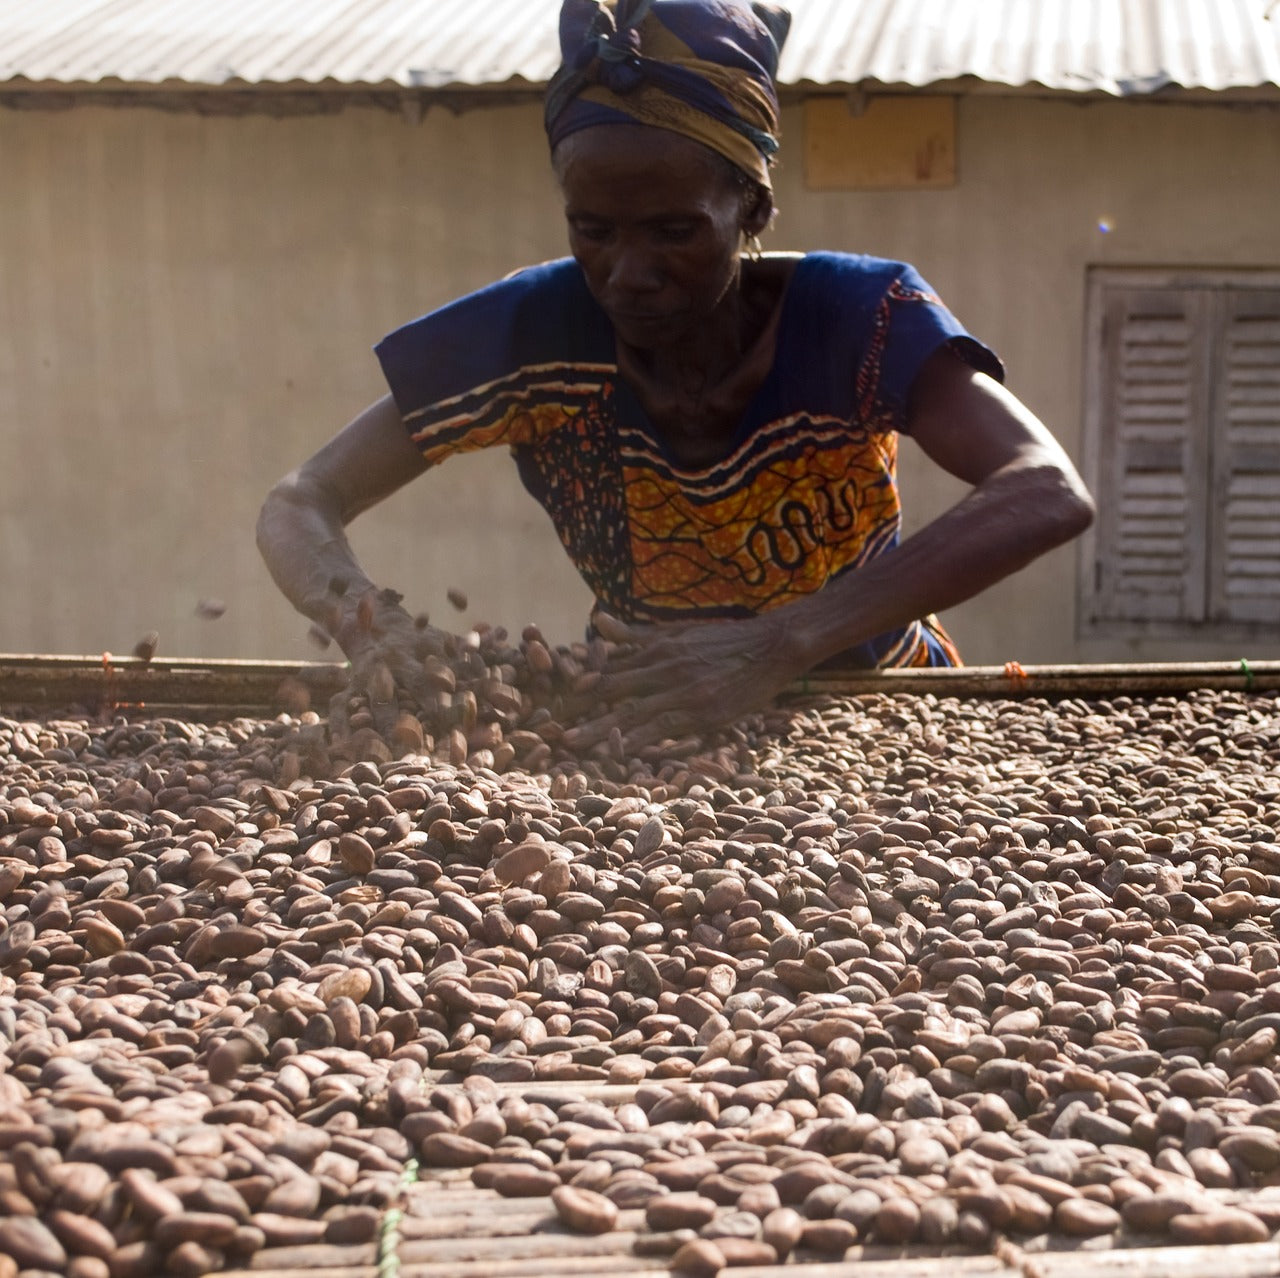 Women sifting through cacao beans